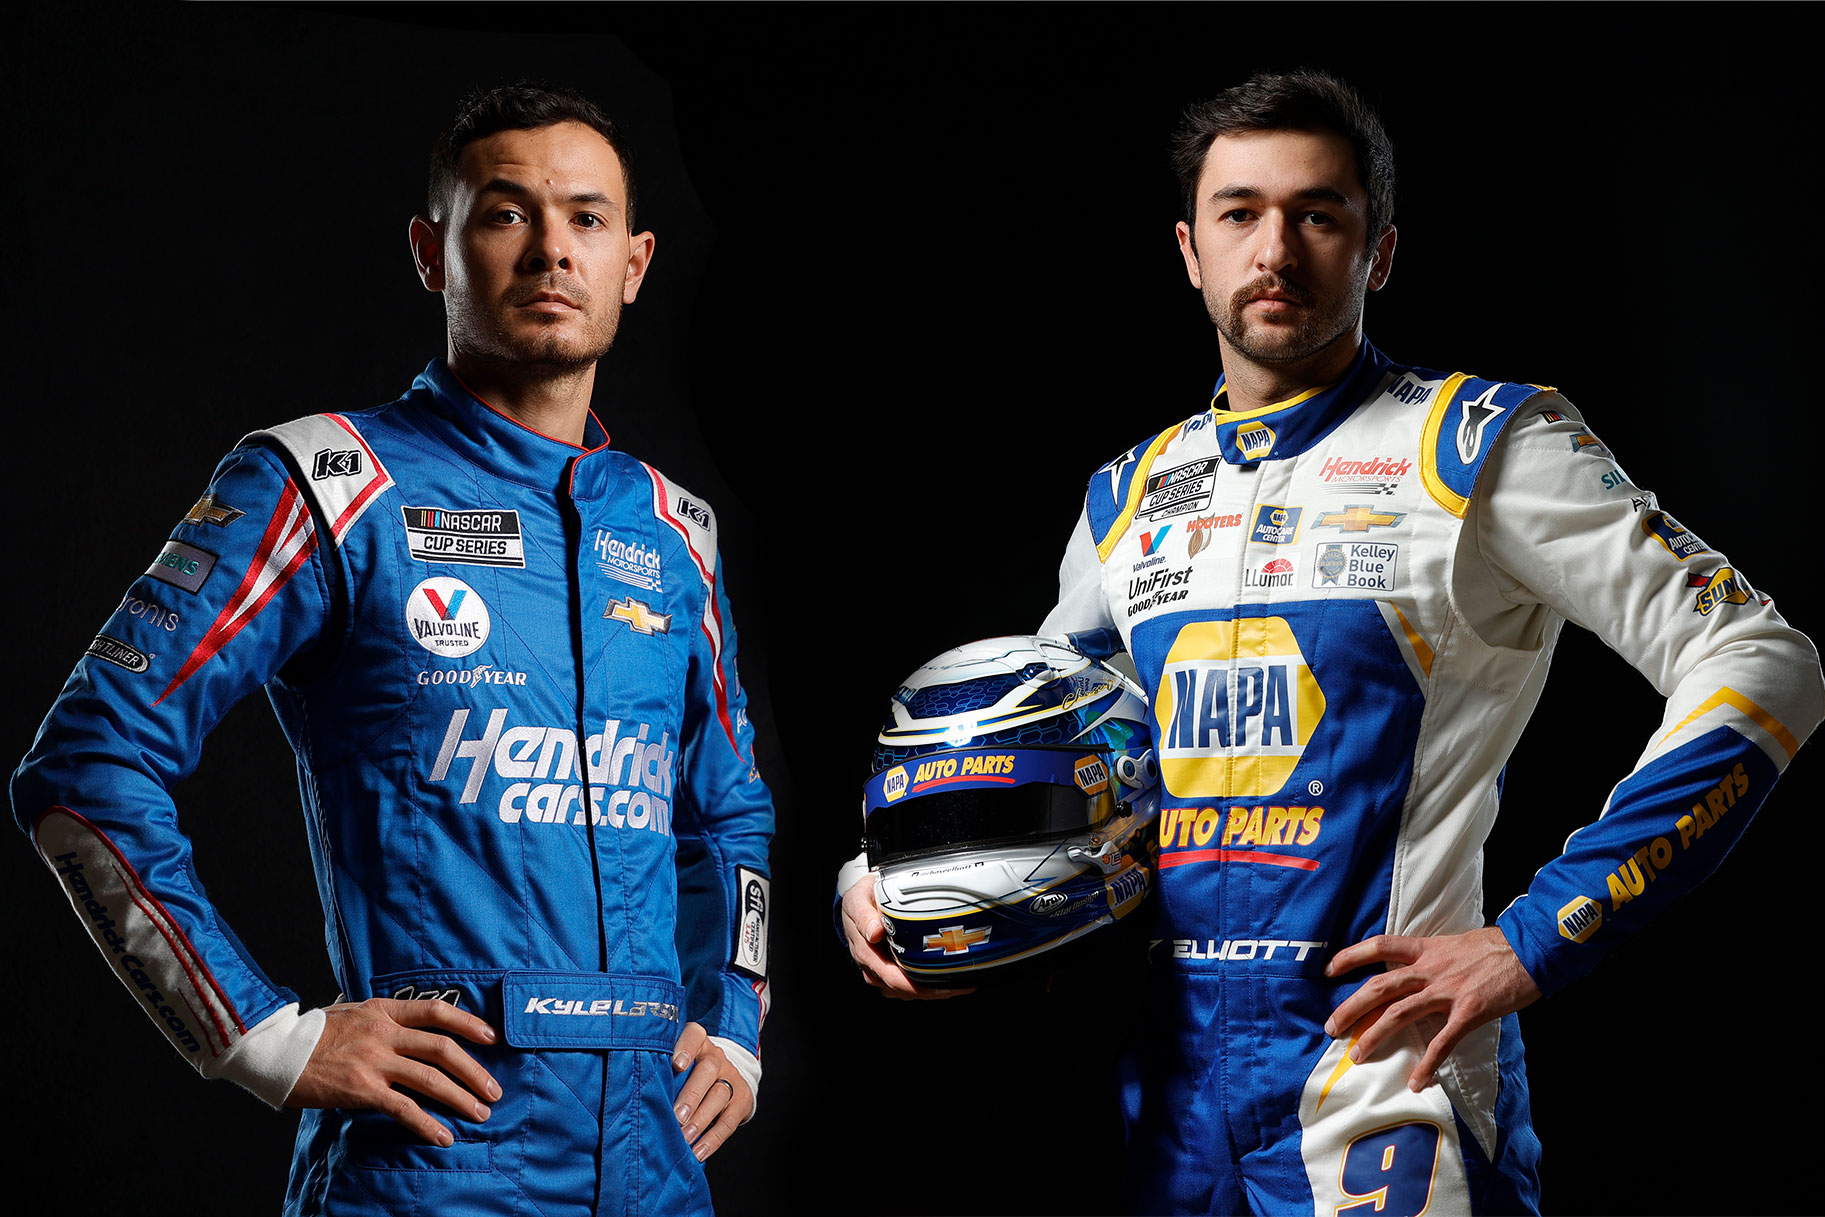 Chase Elliot and Kyle Larson